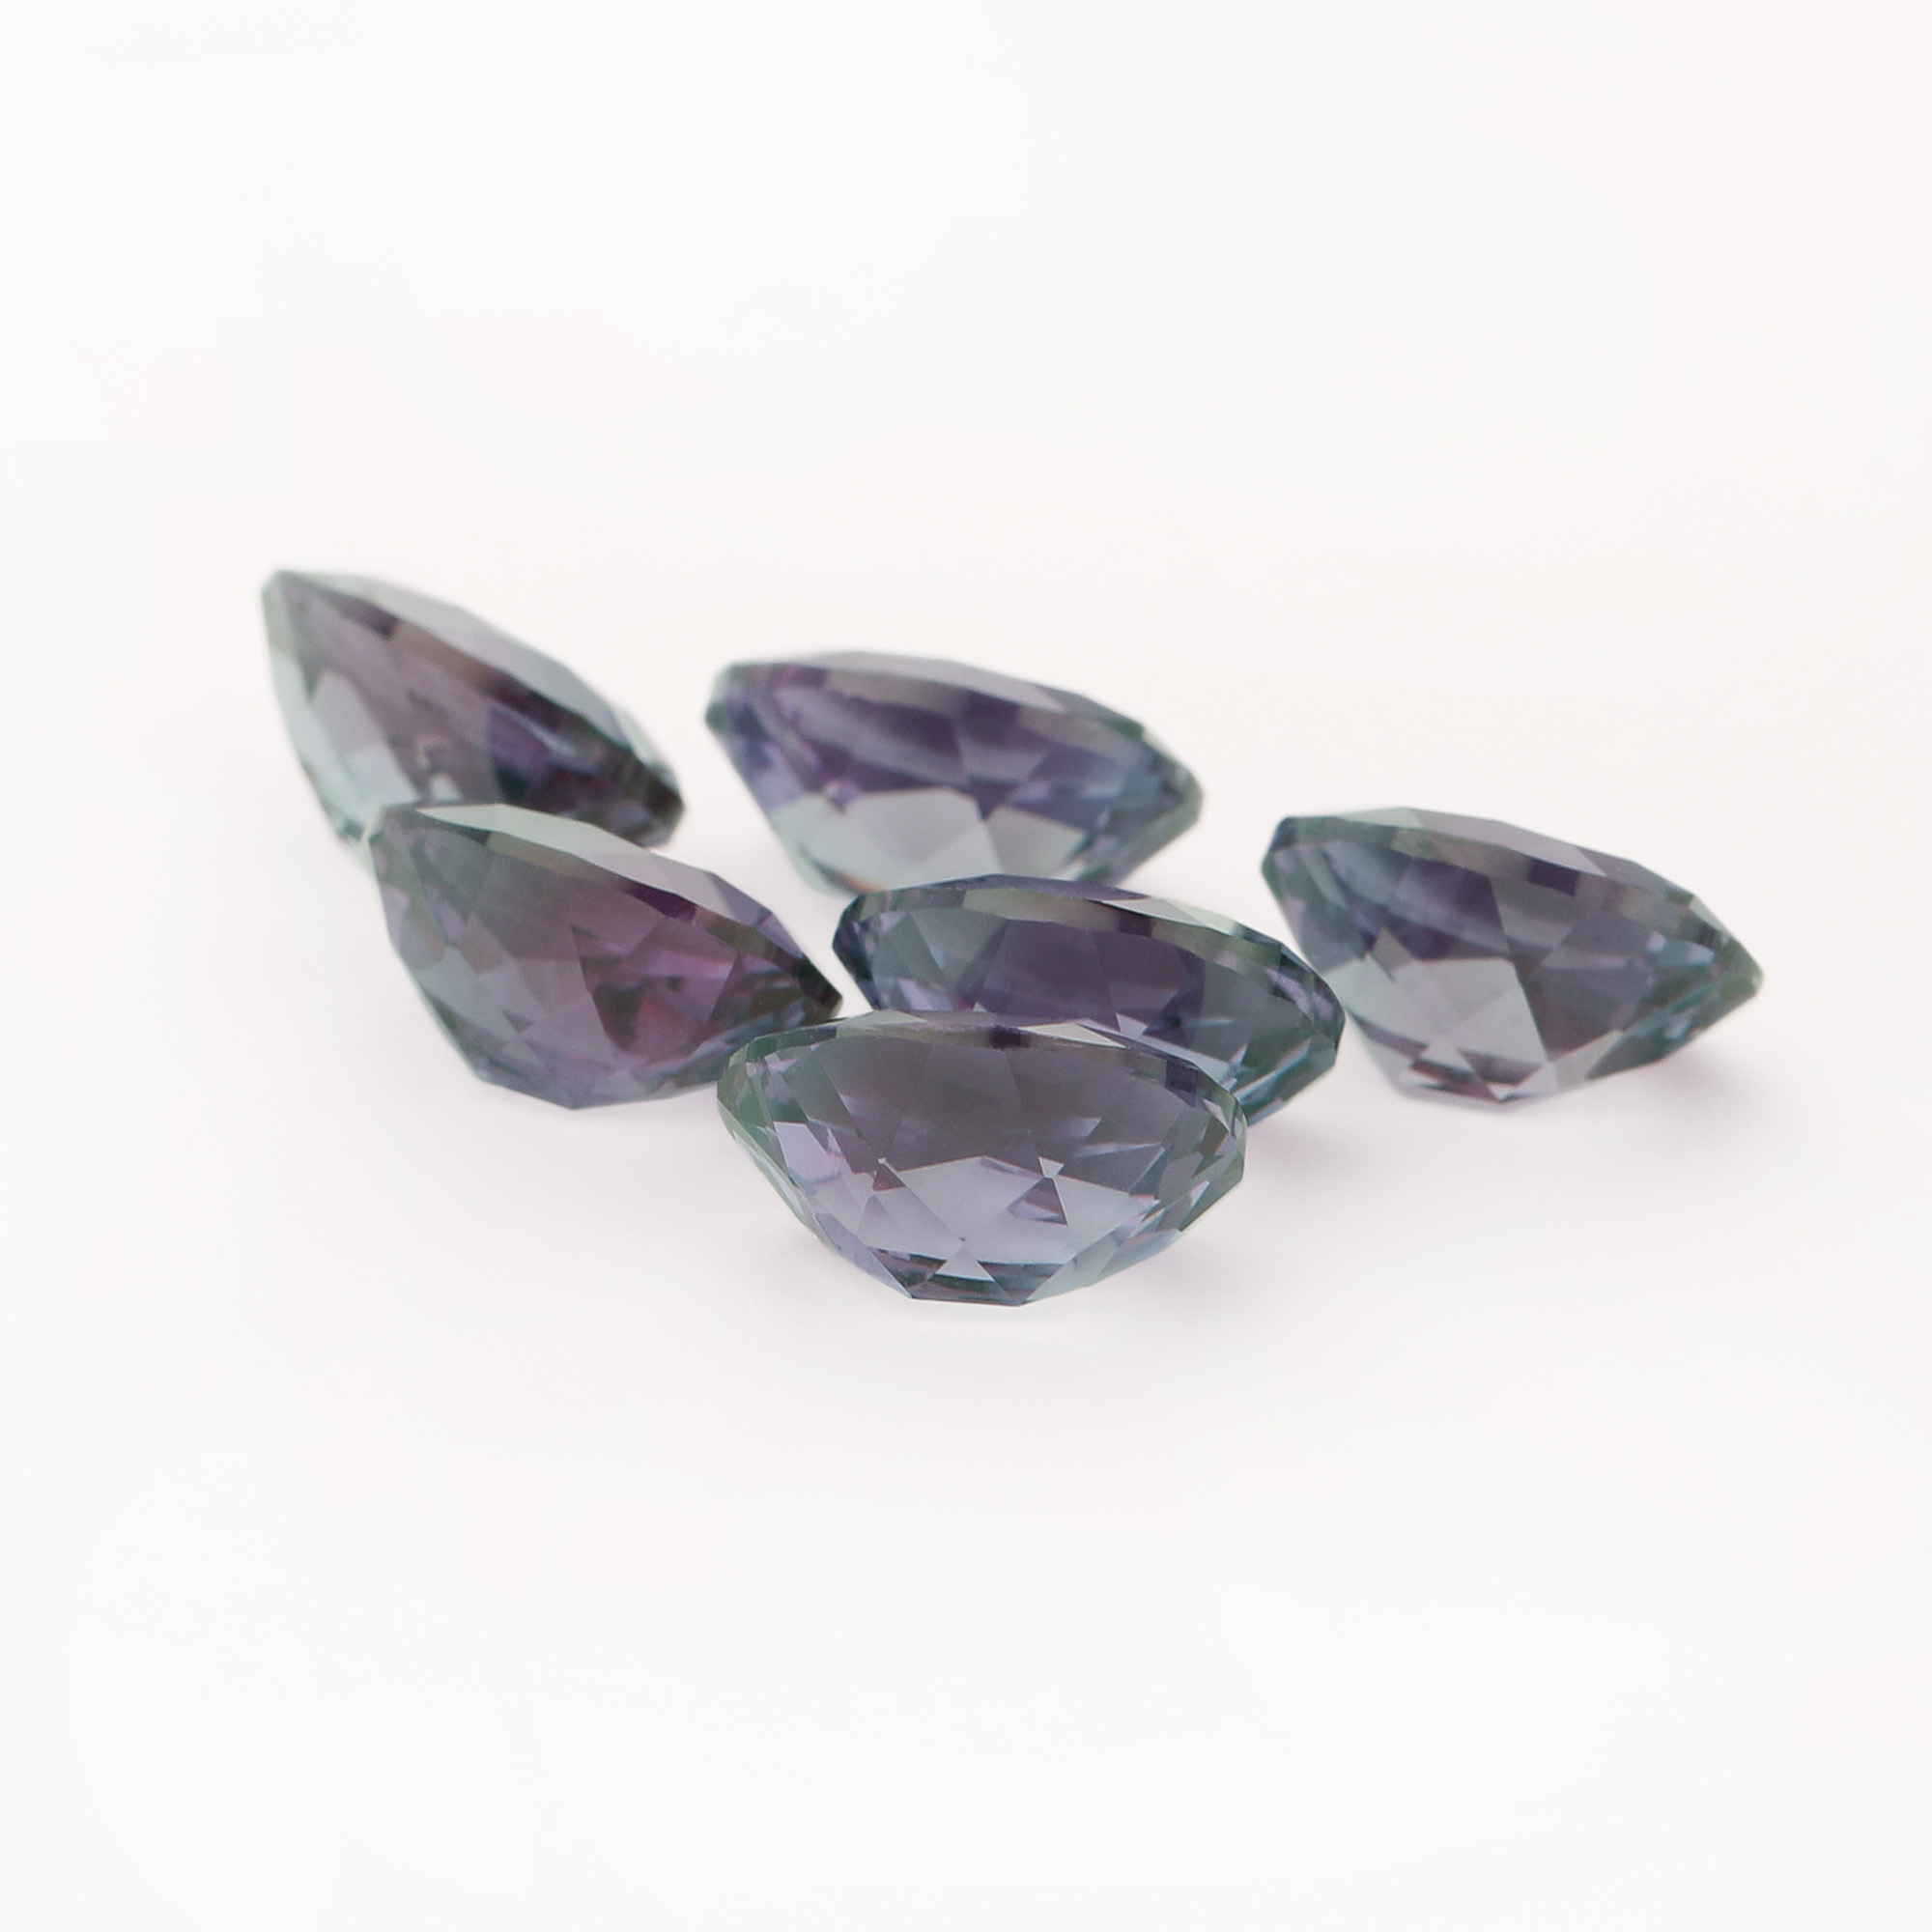 1pcs Simulated Alexandrite Oval Faceted Stone,Color Change Stone,June Birthstone,Unique Gemstone,Loose Stone,DIY Jewelry Supplies 4120145 - Click Image to Close